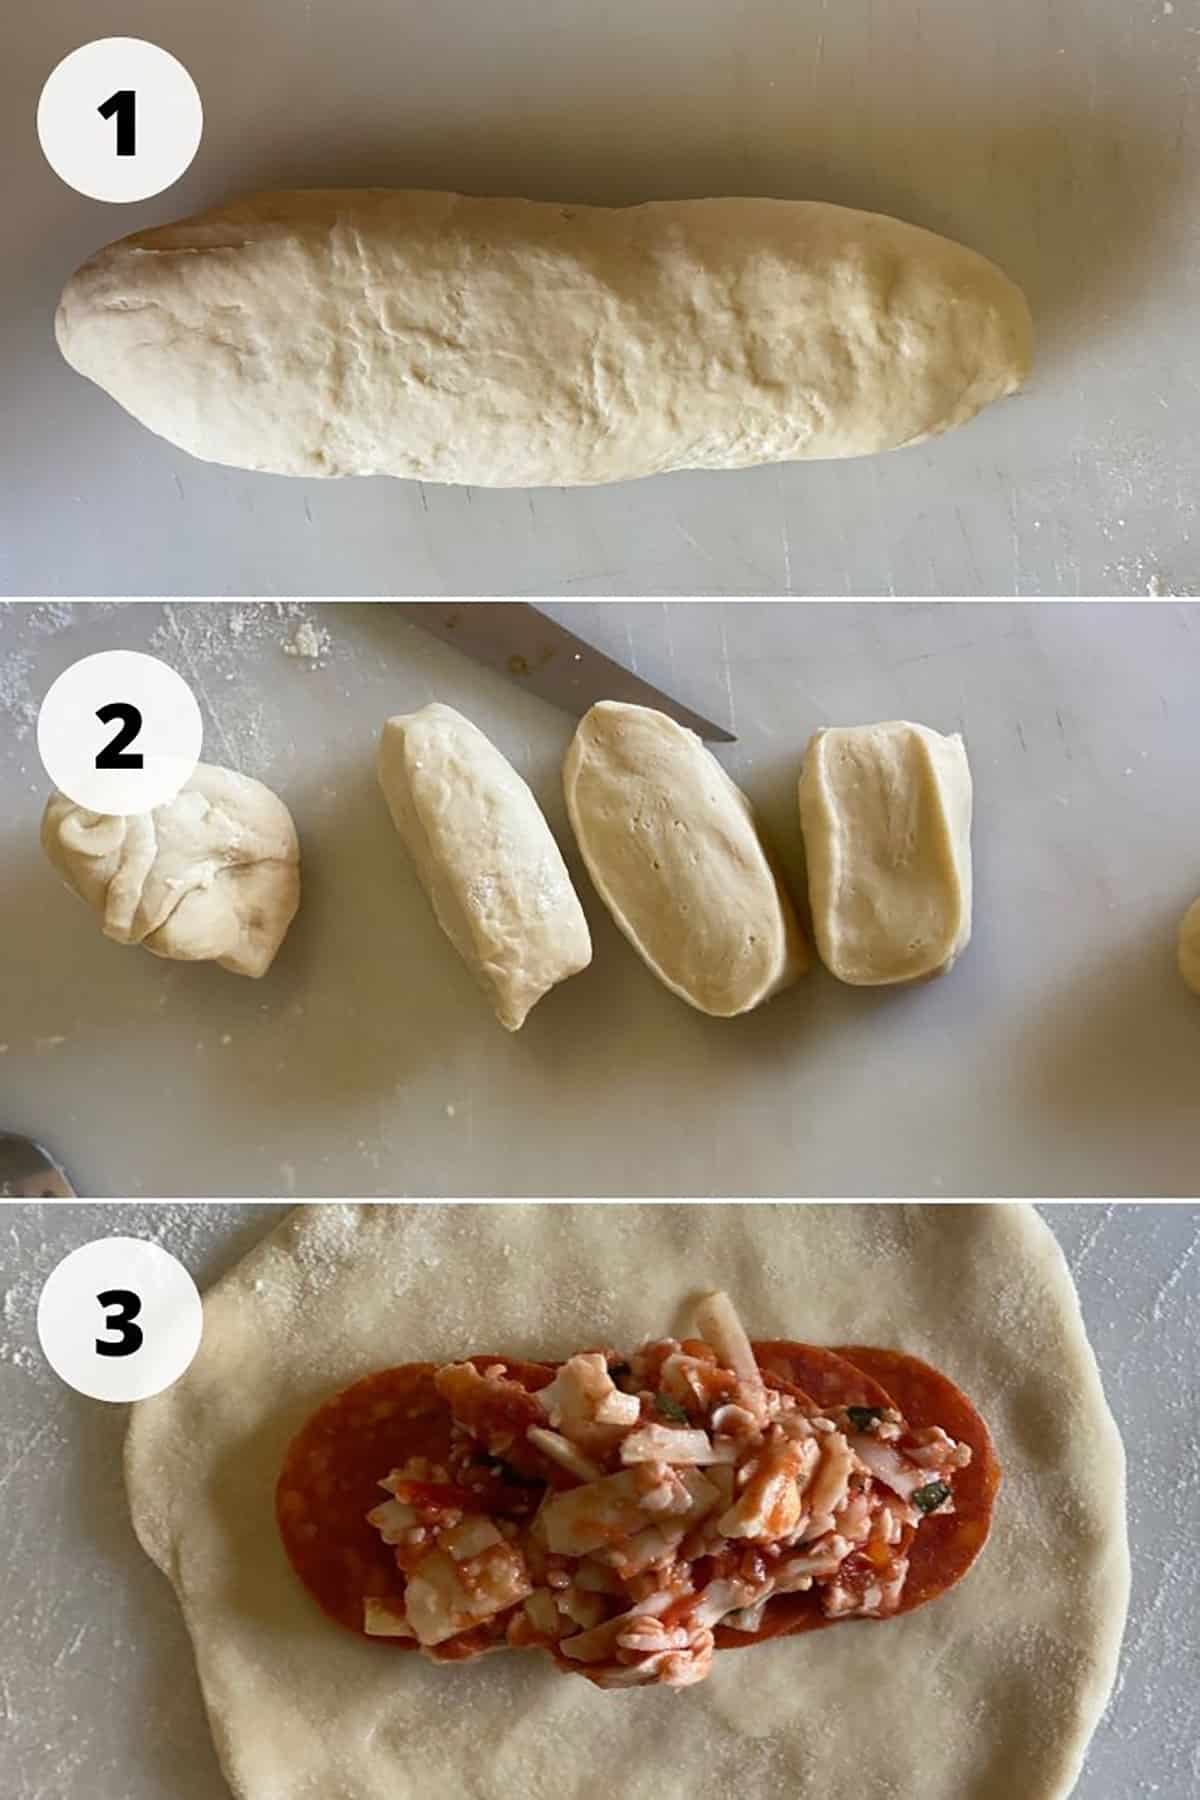 Ponzerotti dough and filling process pictures 1-3. Full details of the picture listed below.